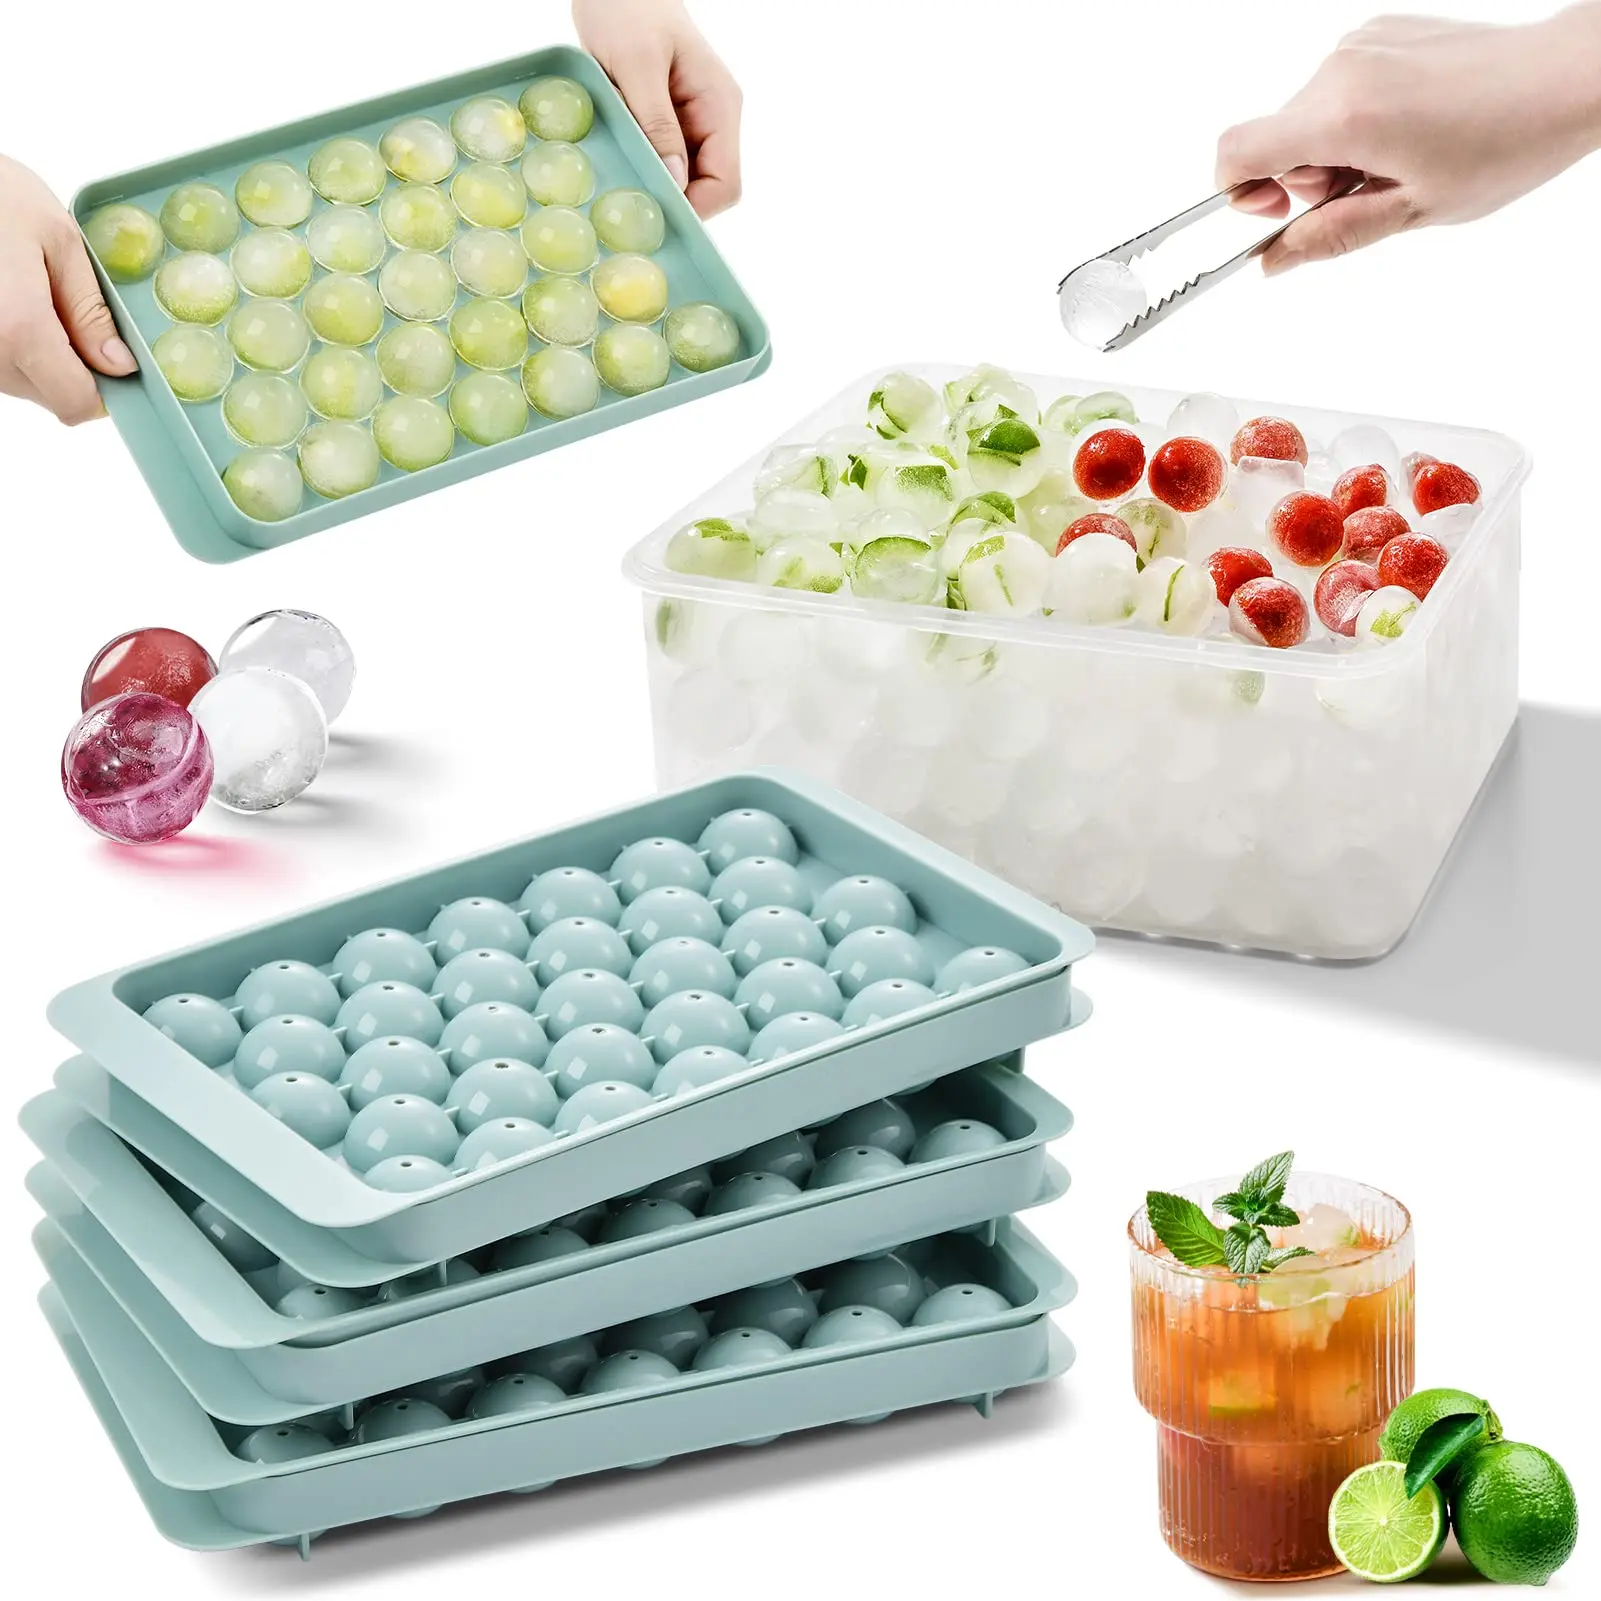 33 Ice Boll Hockey Pp Mold Frozen Whiskey Ball Popsicle Ice Cube Tray Box Lollipop Making Gifts Kitchen Tools Accessories